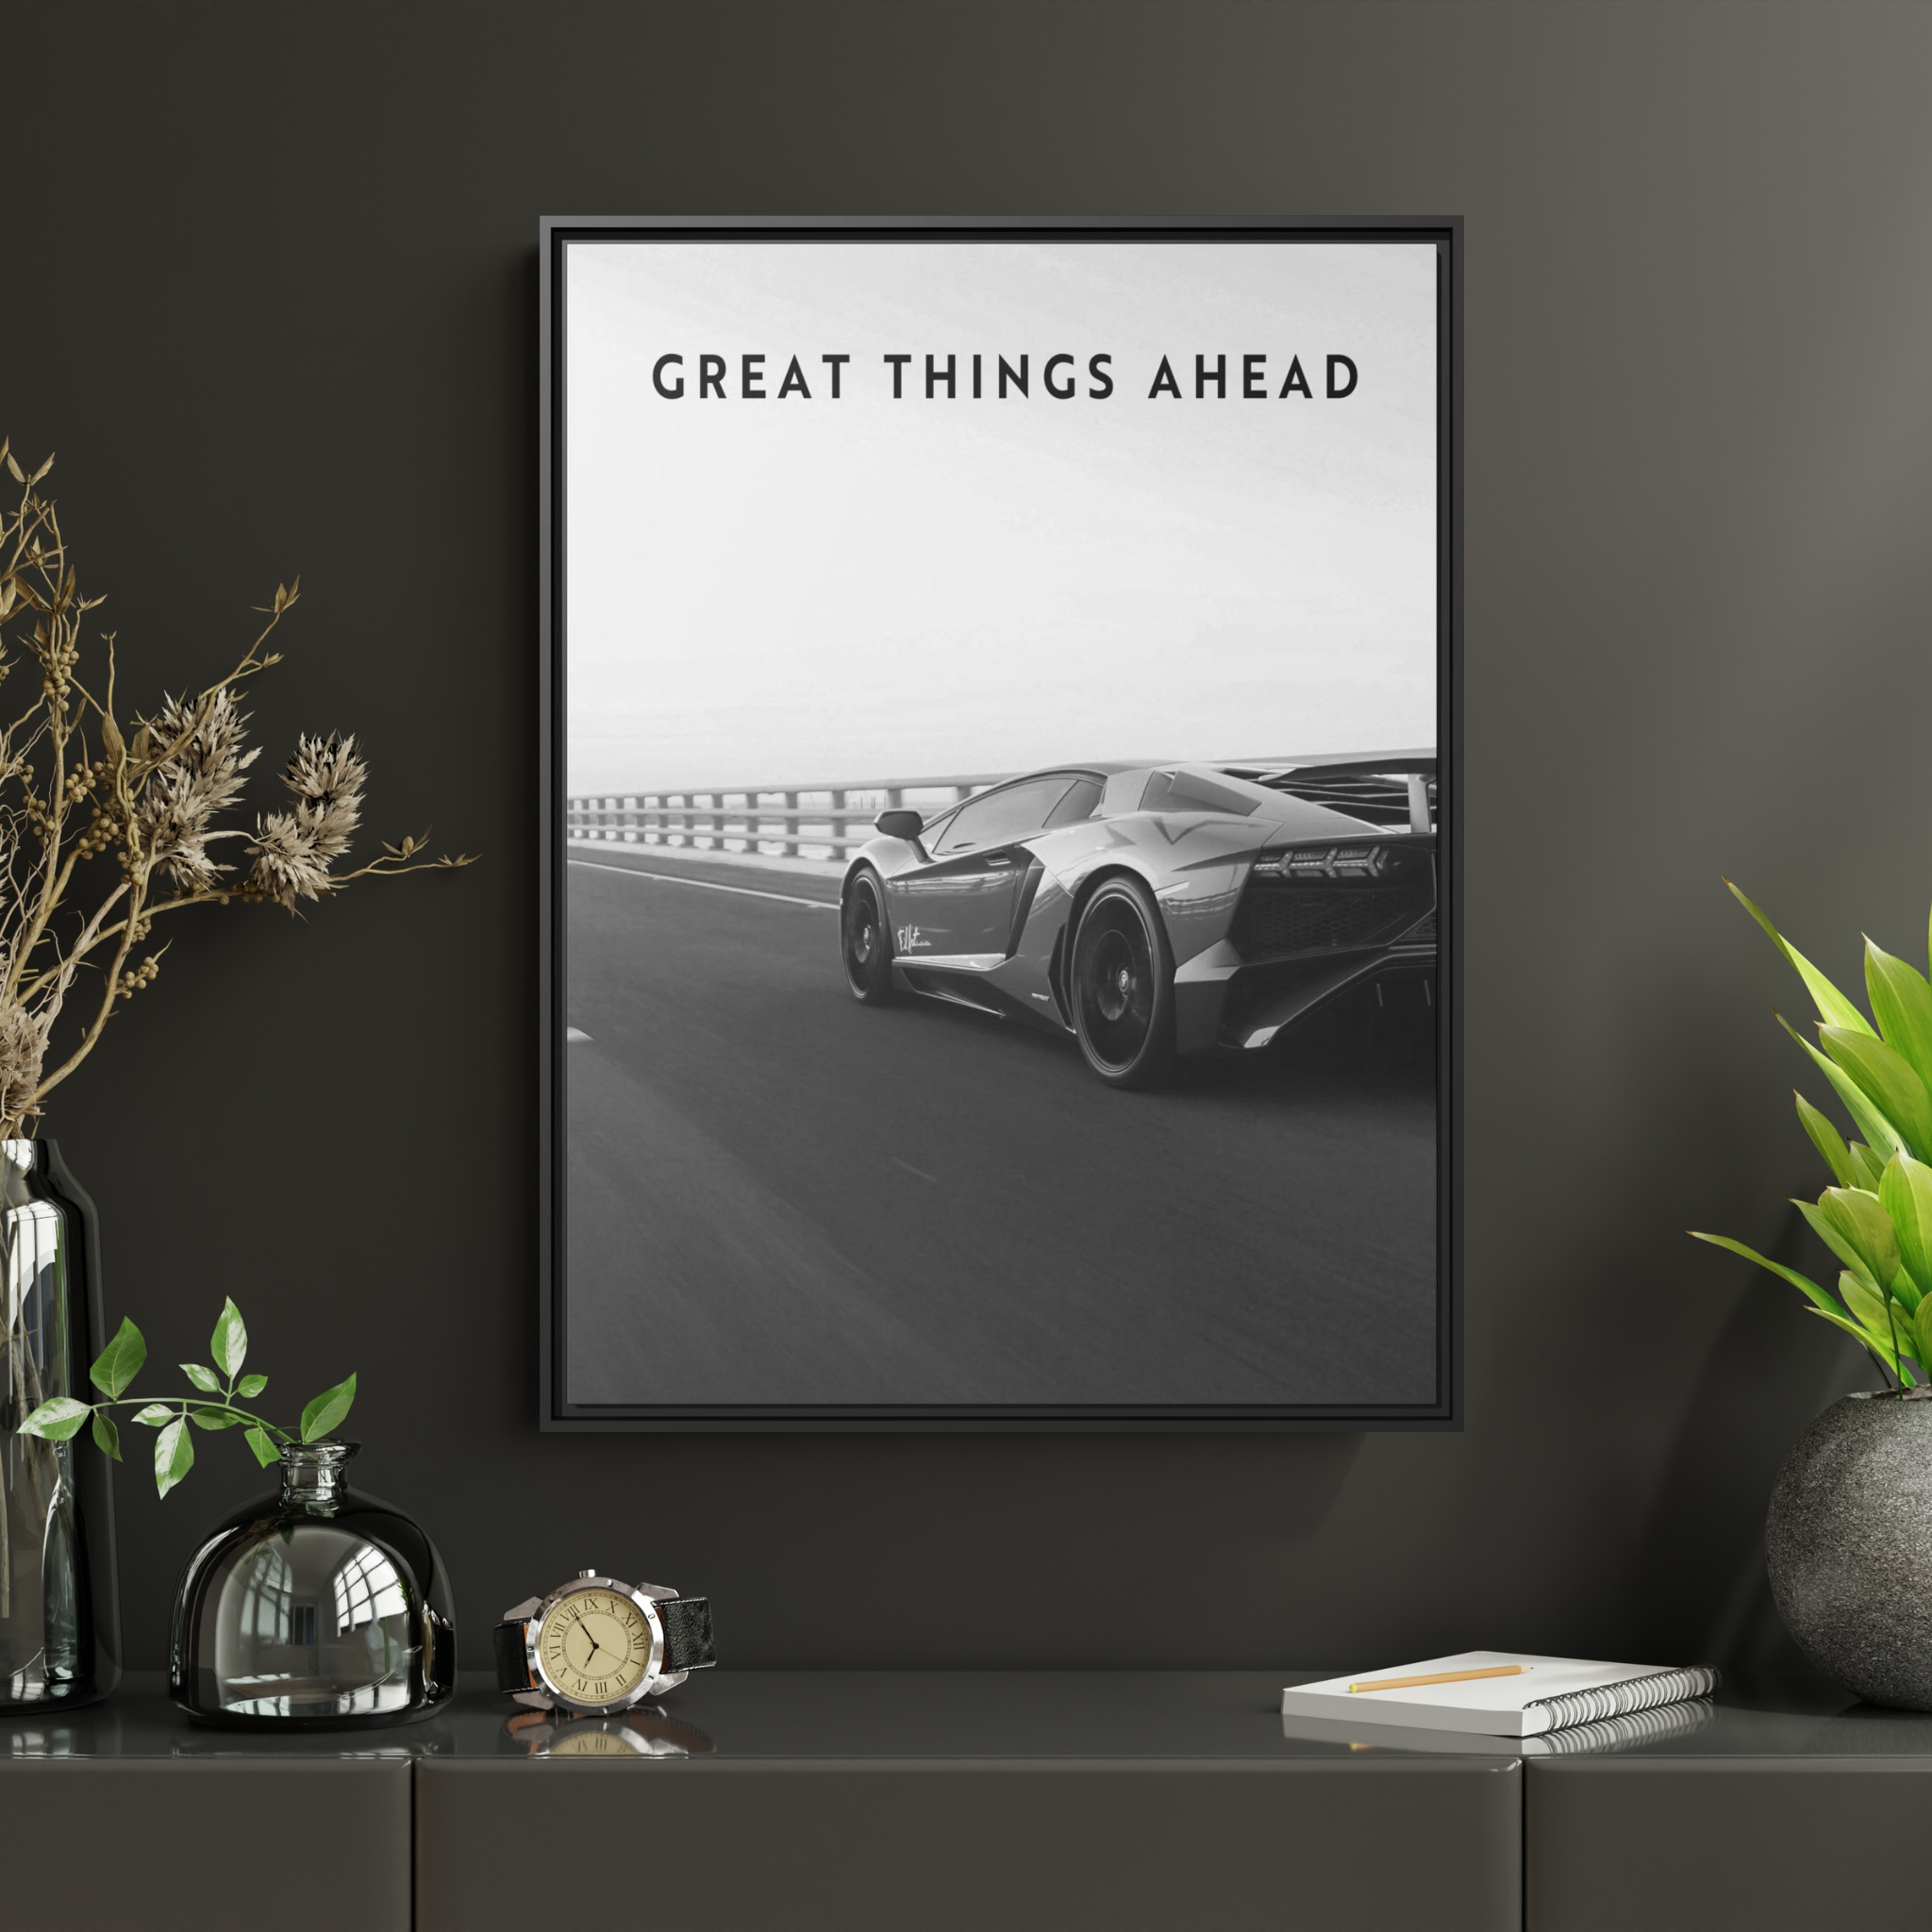 Great Things Ahead - Sports Car Black And White - Wall Art additional image 1